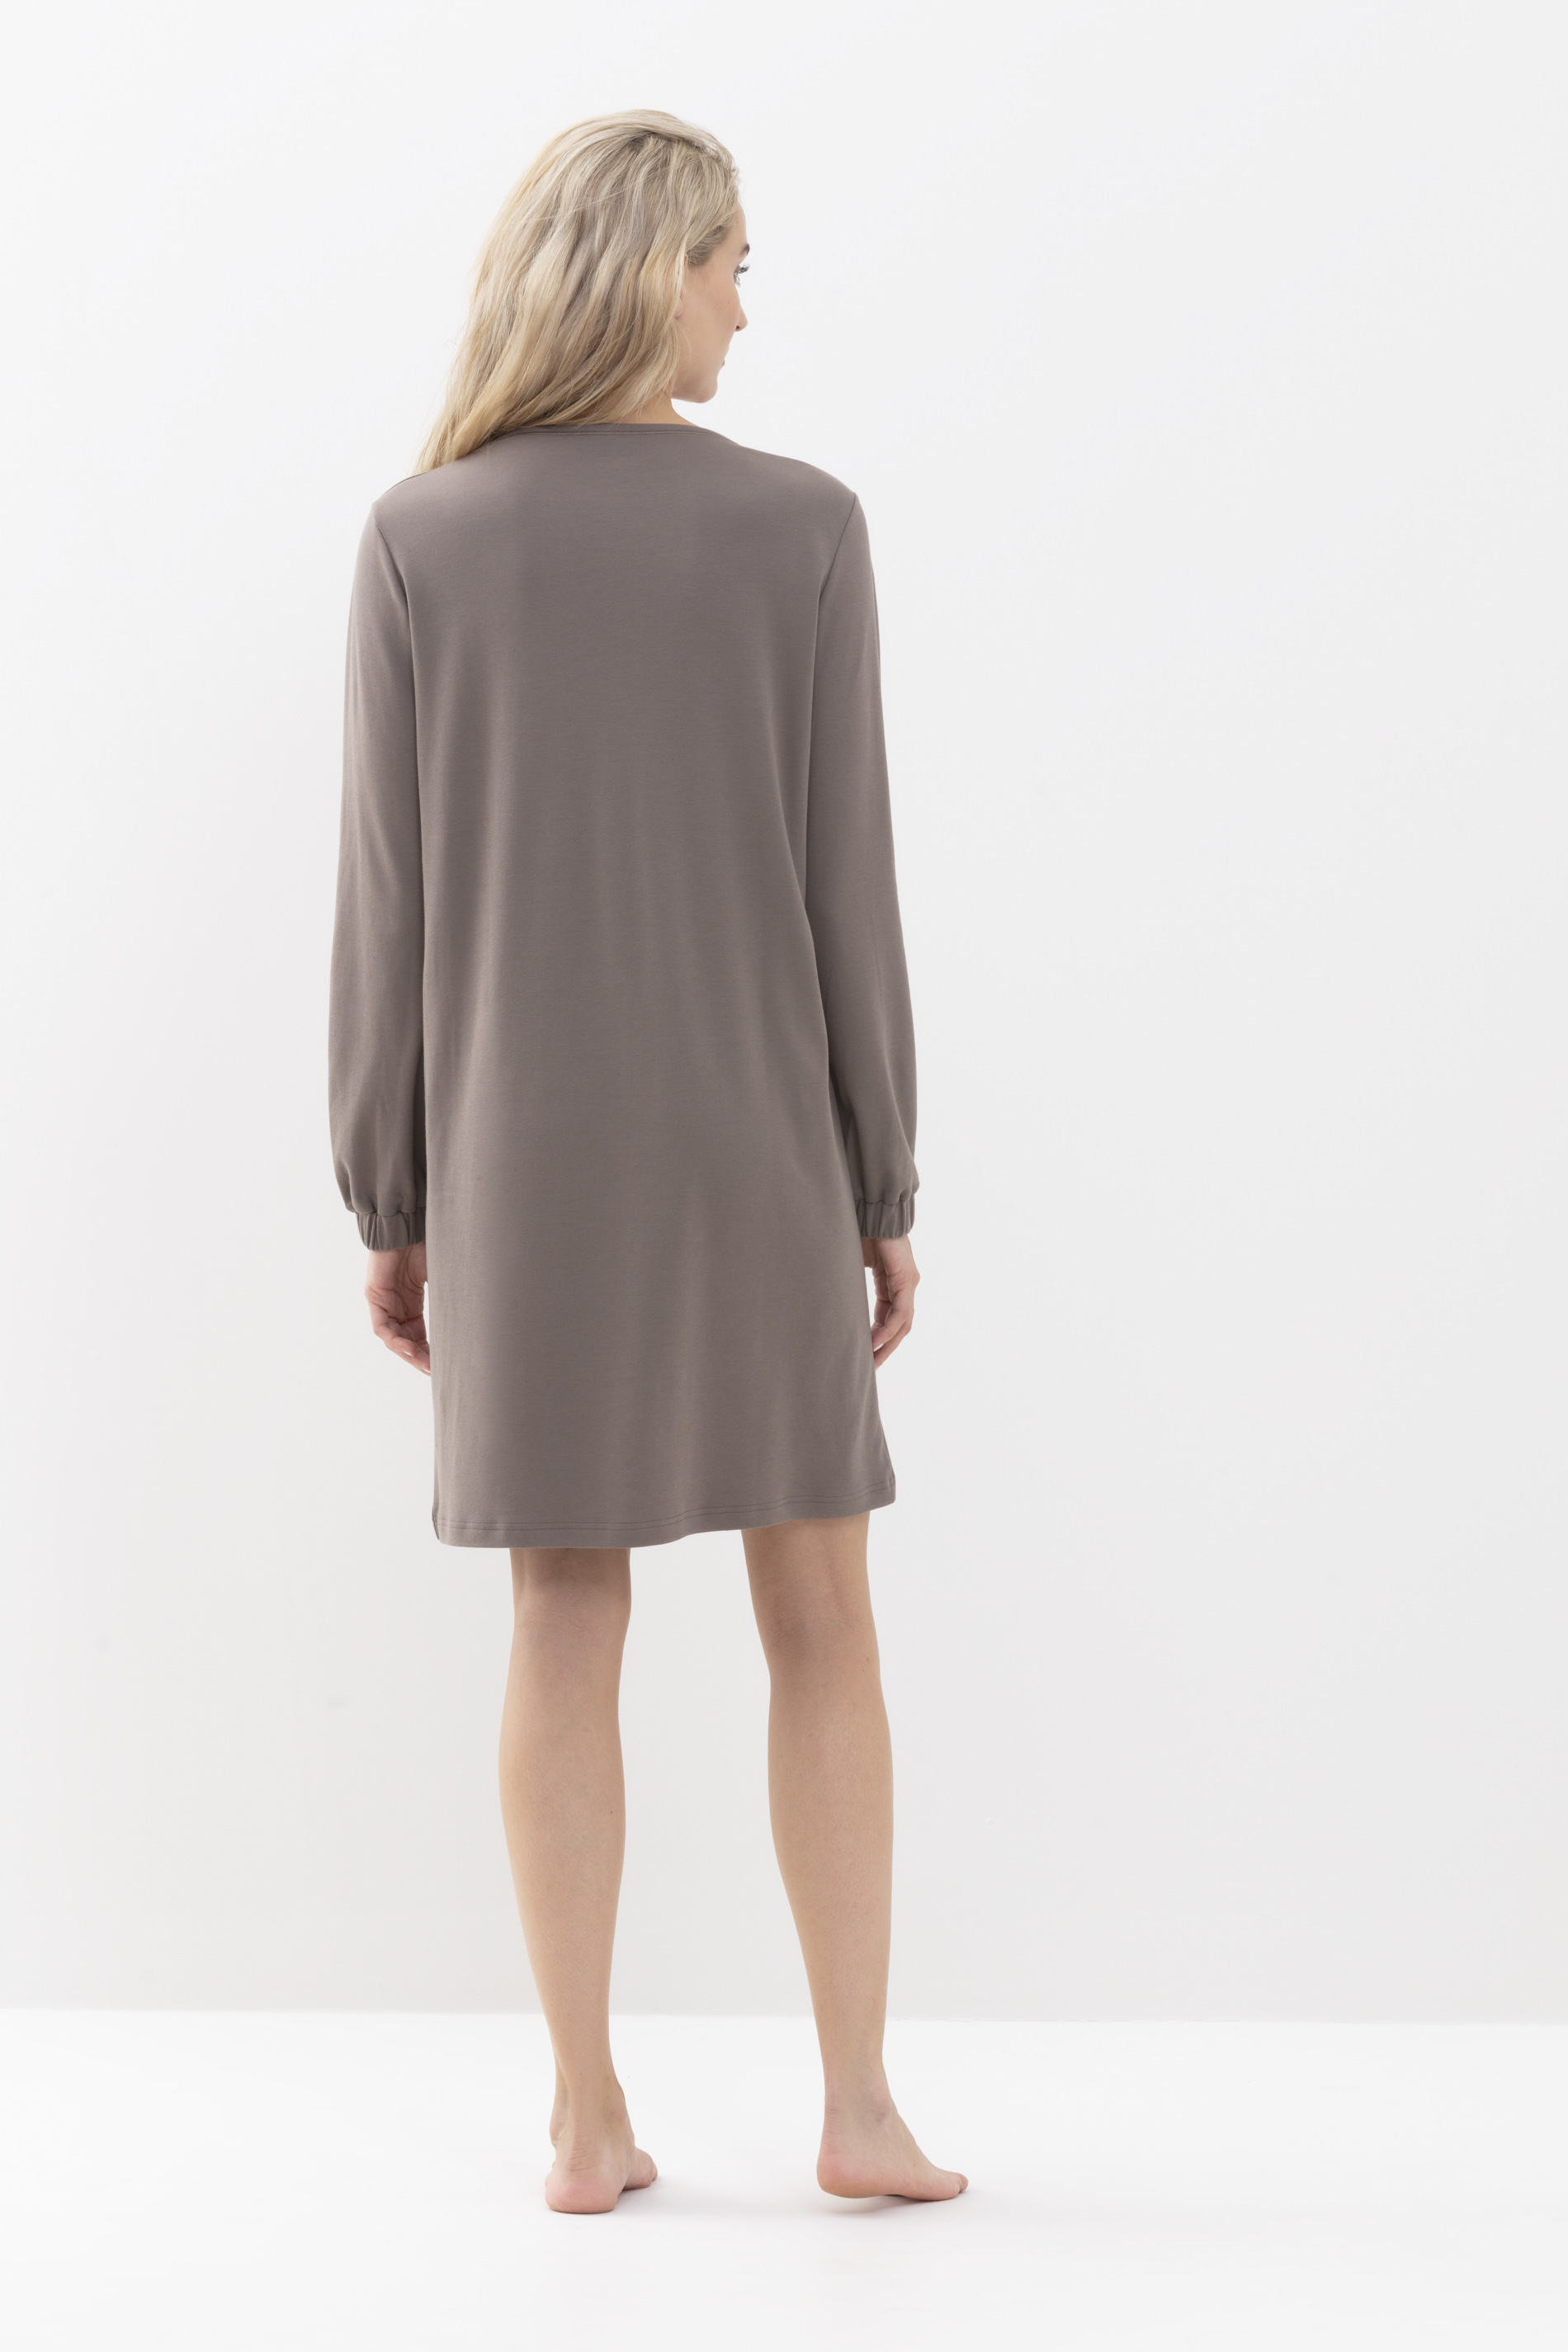 Nightshirt with full-length sleeves Deep Taupe Serie N8TEX 2.0 Rear View | mey®